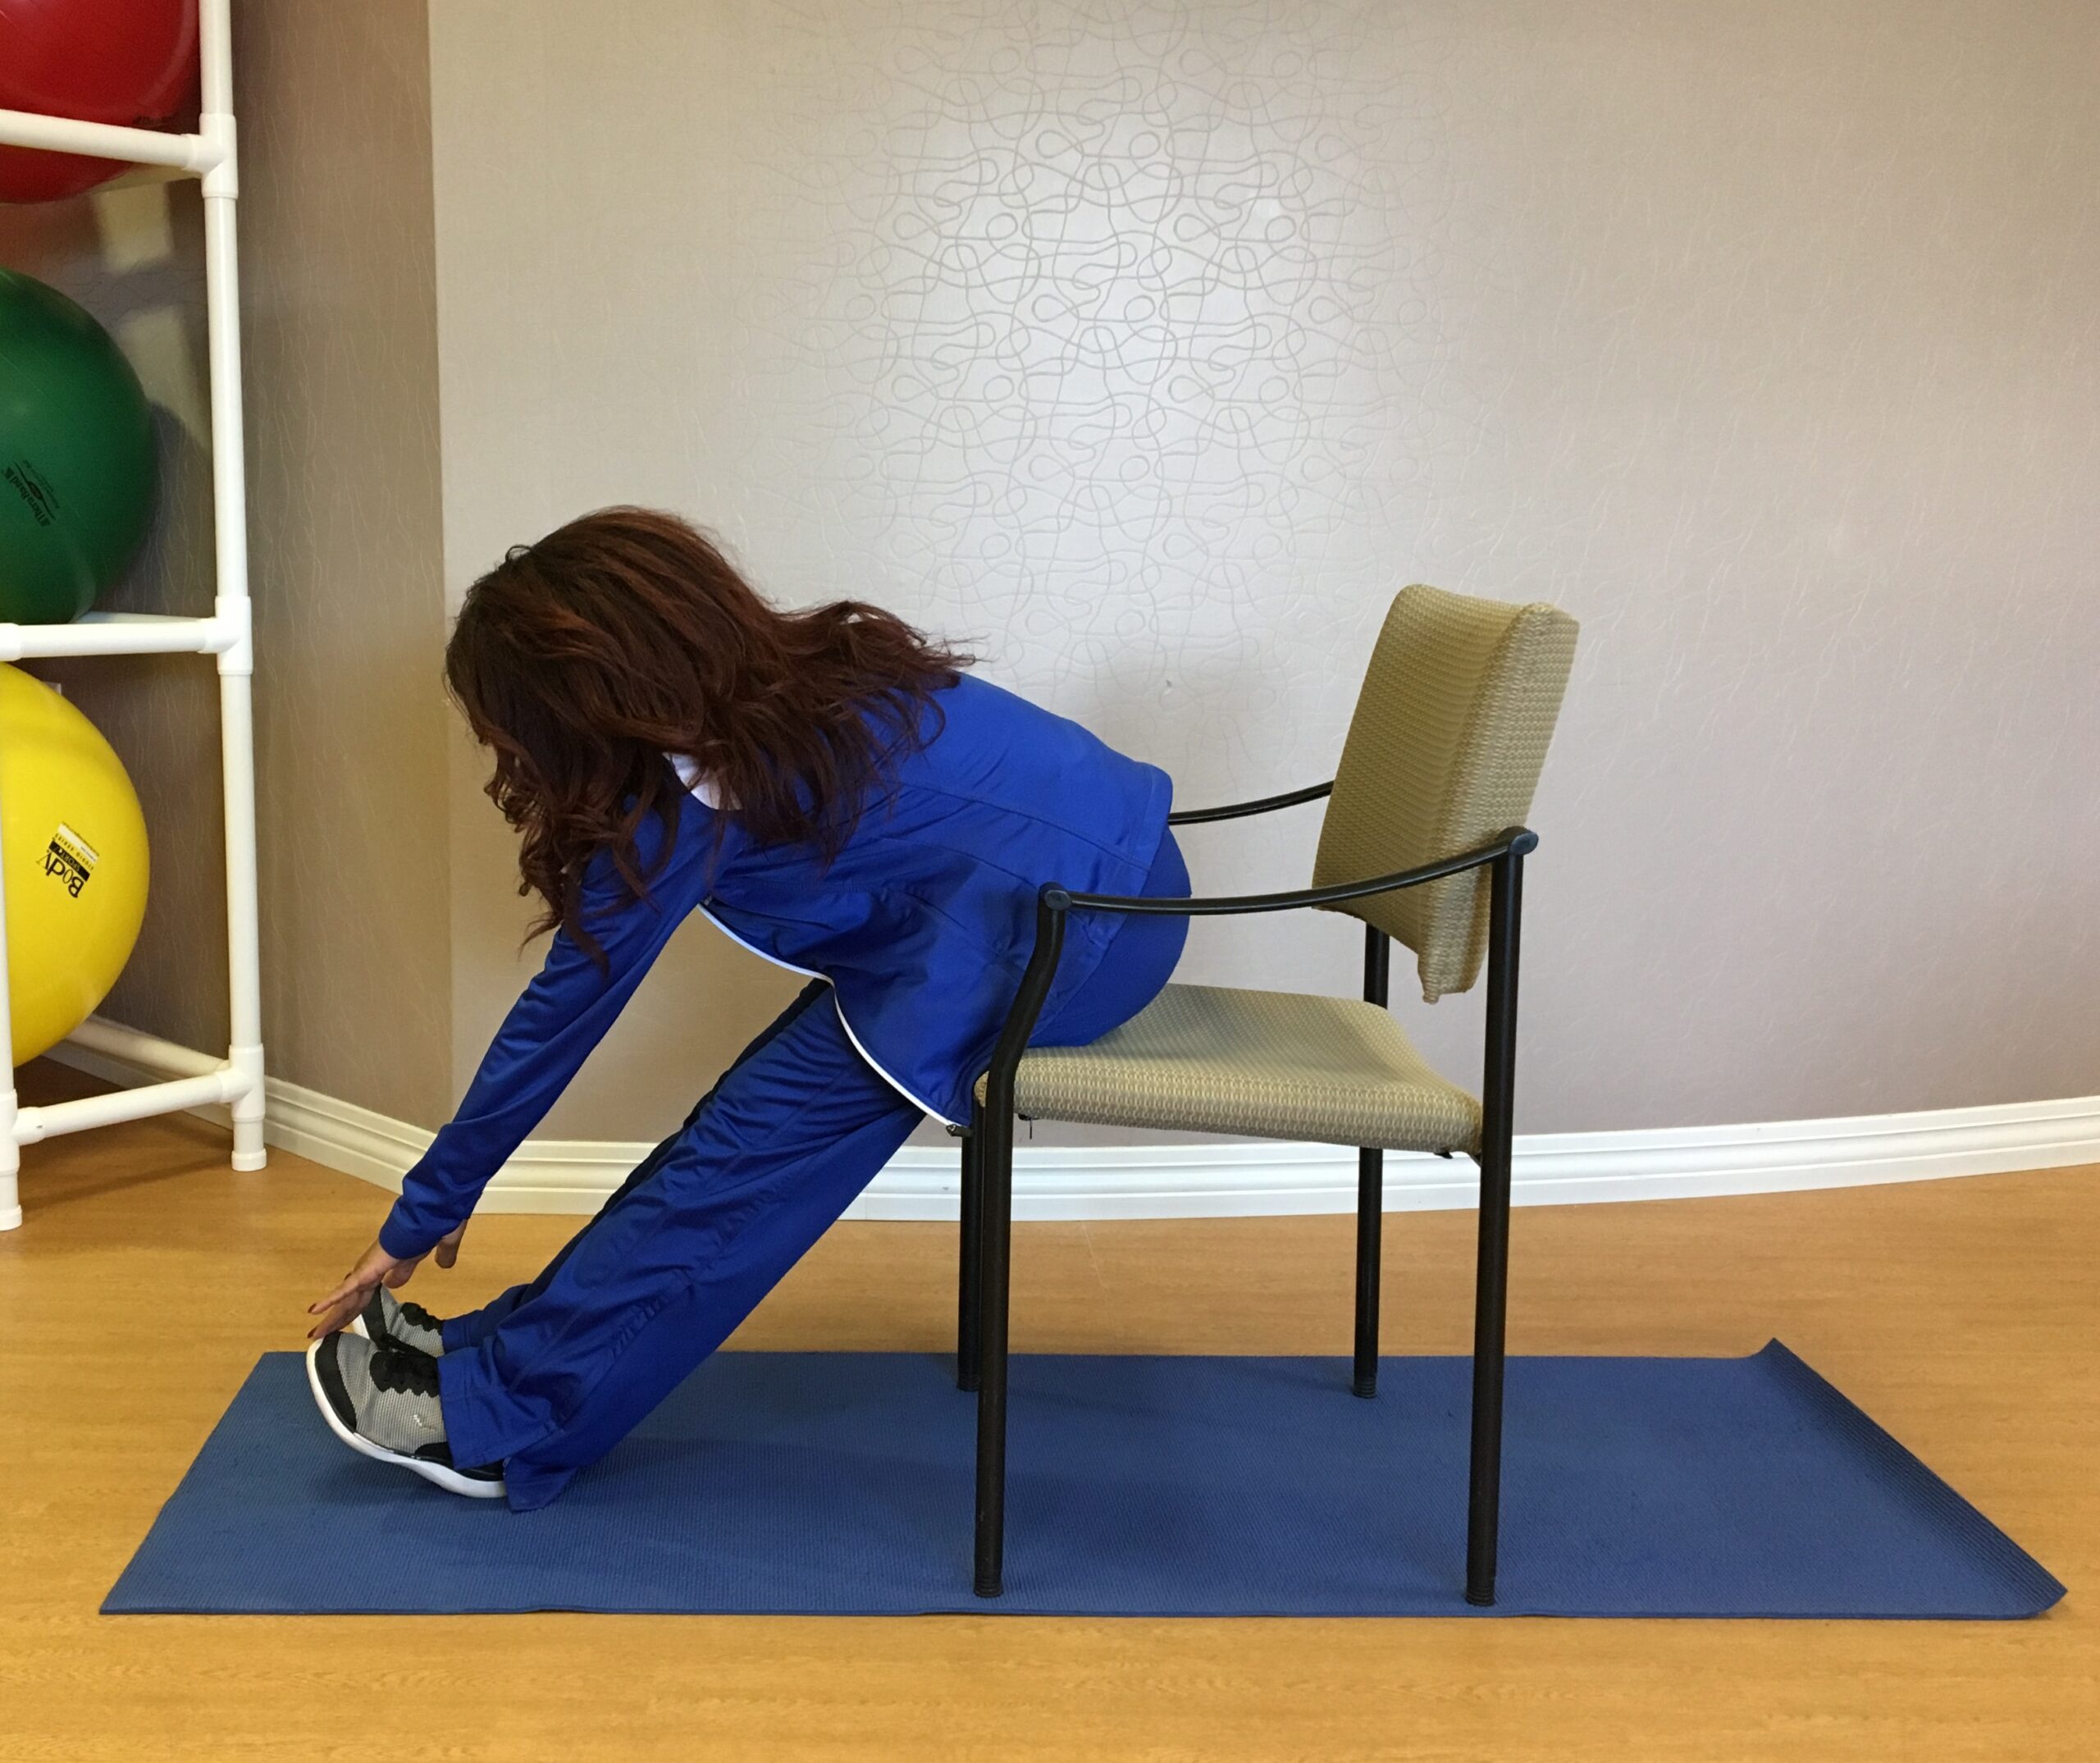 Lower Body Stretches